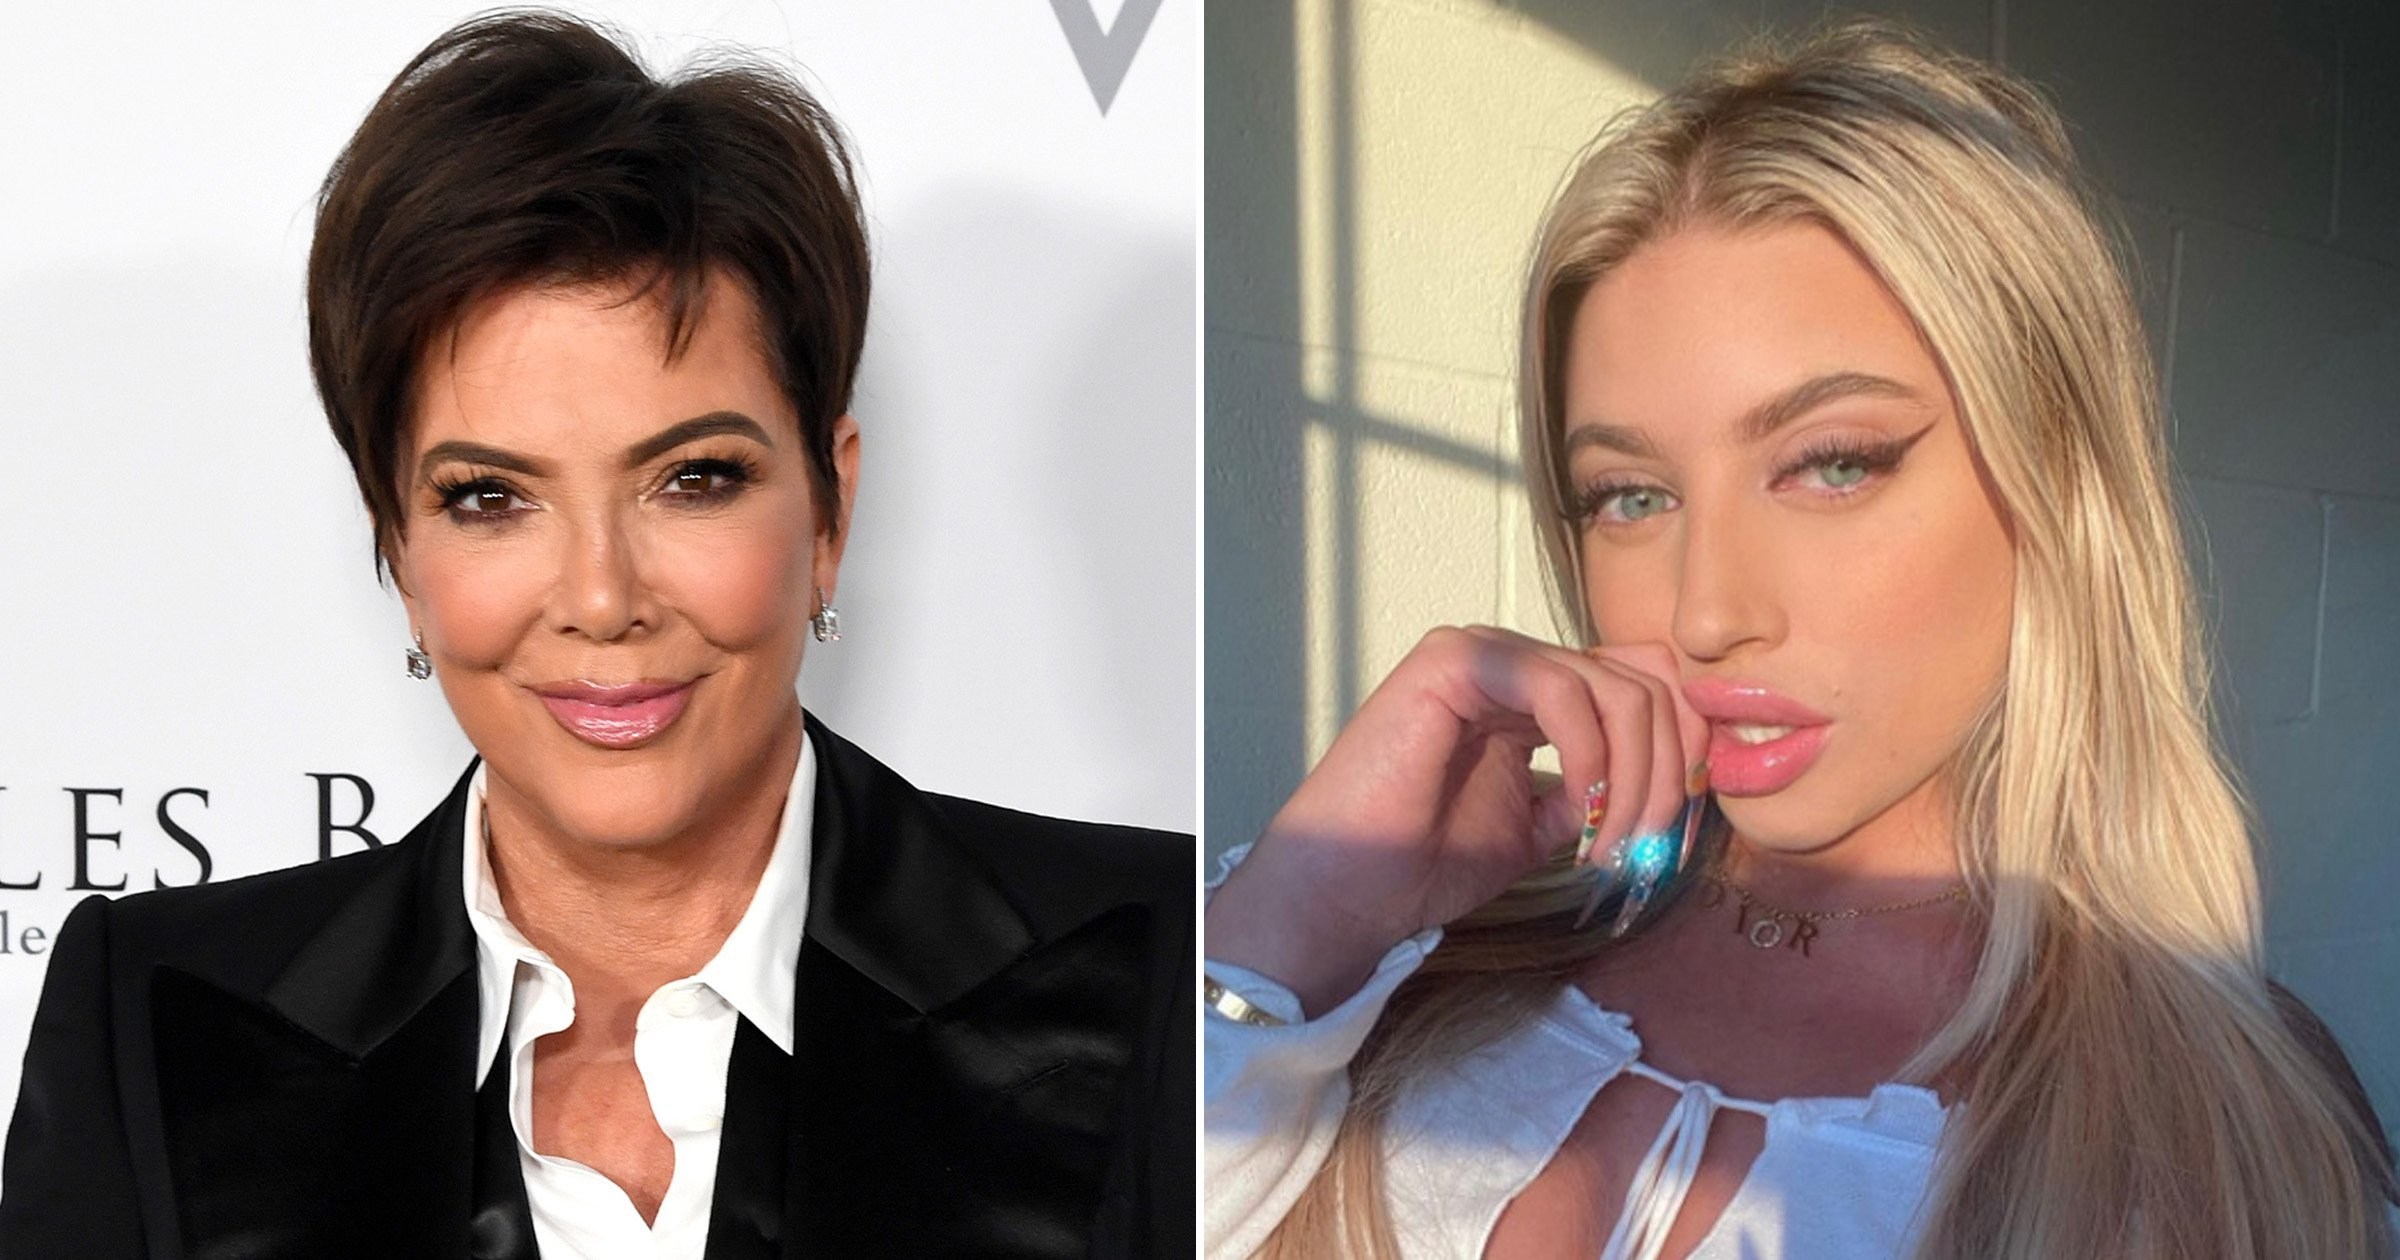 Kris Jenner ‘threatening legal action’ against TikTok star behind bizarre Kanye West and Jeffree Star claims